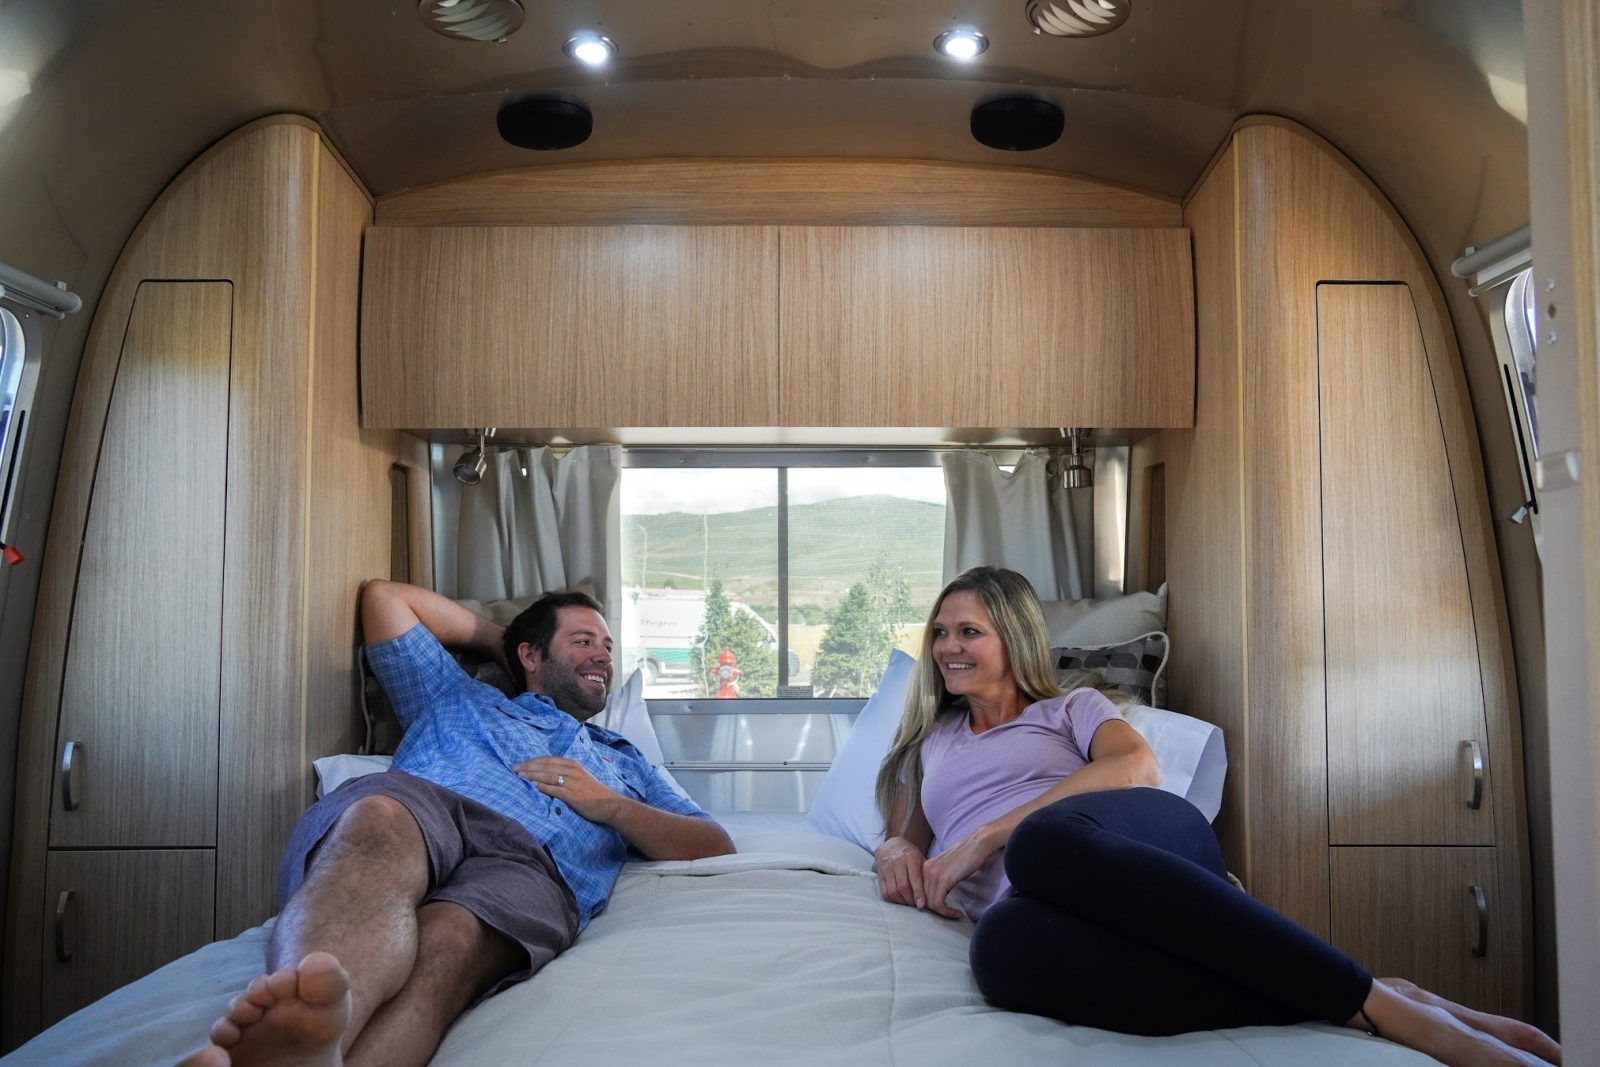 https://www.followyourdetour.com/wp-content/uploads/2022/01/Couple-laying-on-bed-in-cozy-RV-bedroom-e1642539879223.jpg